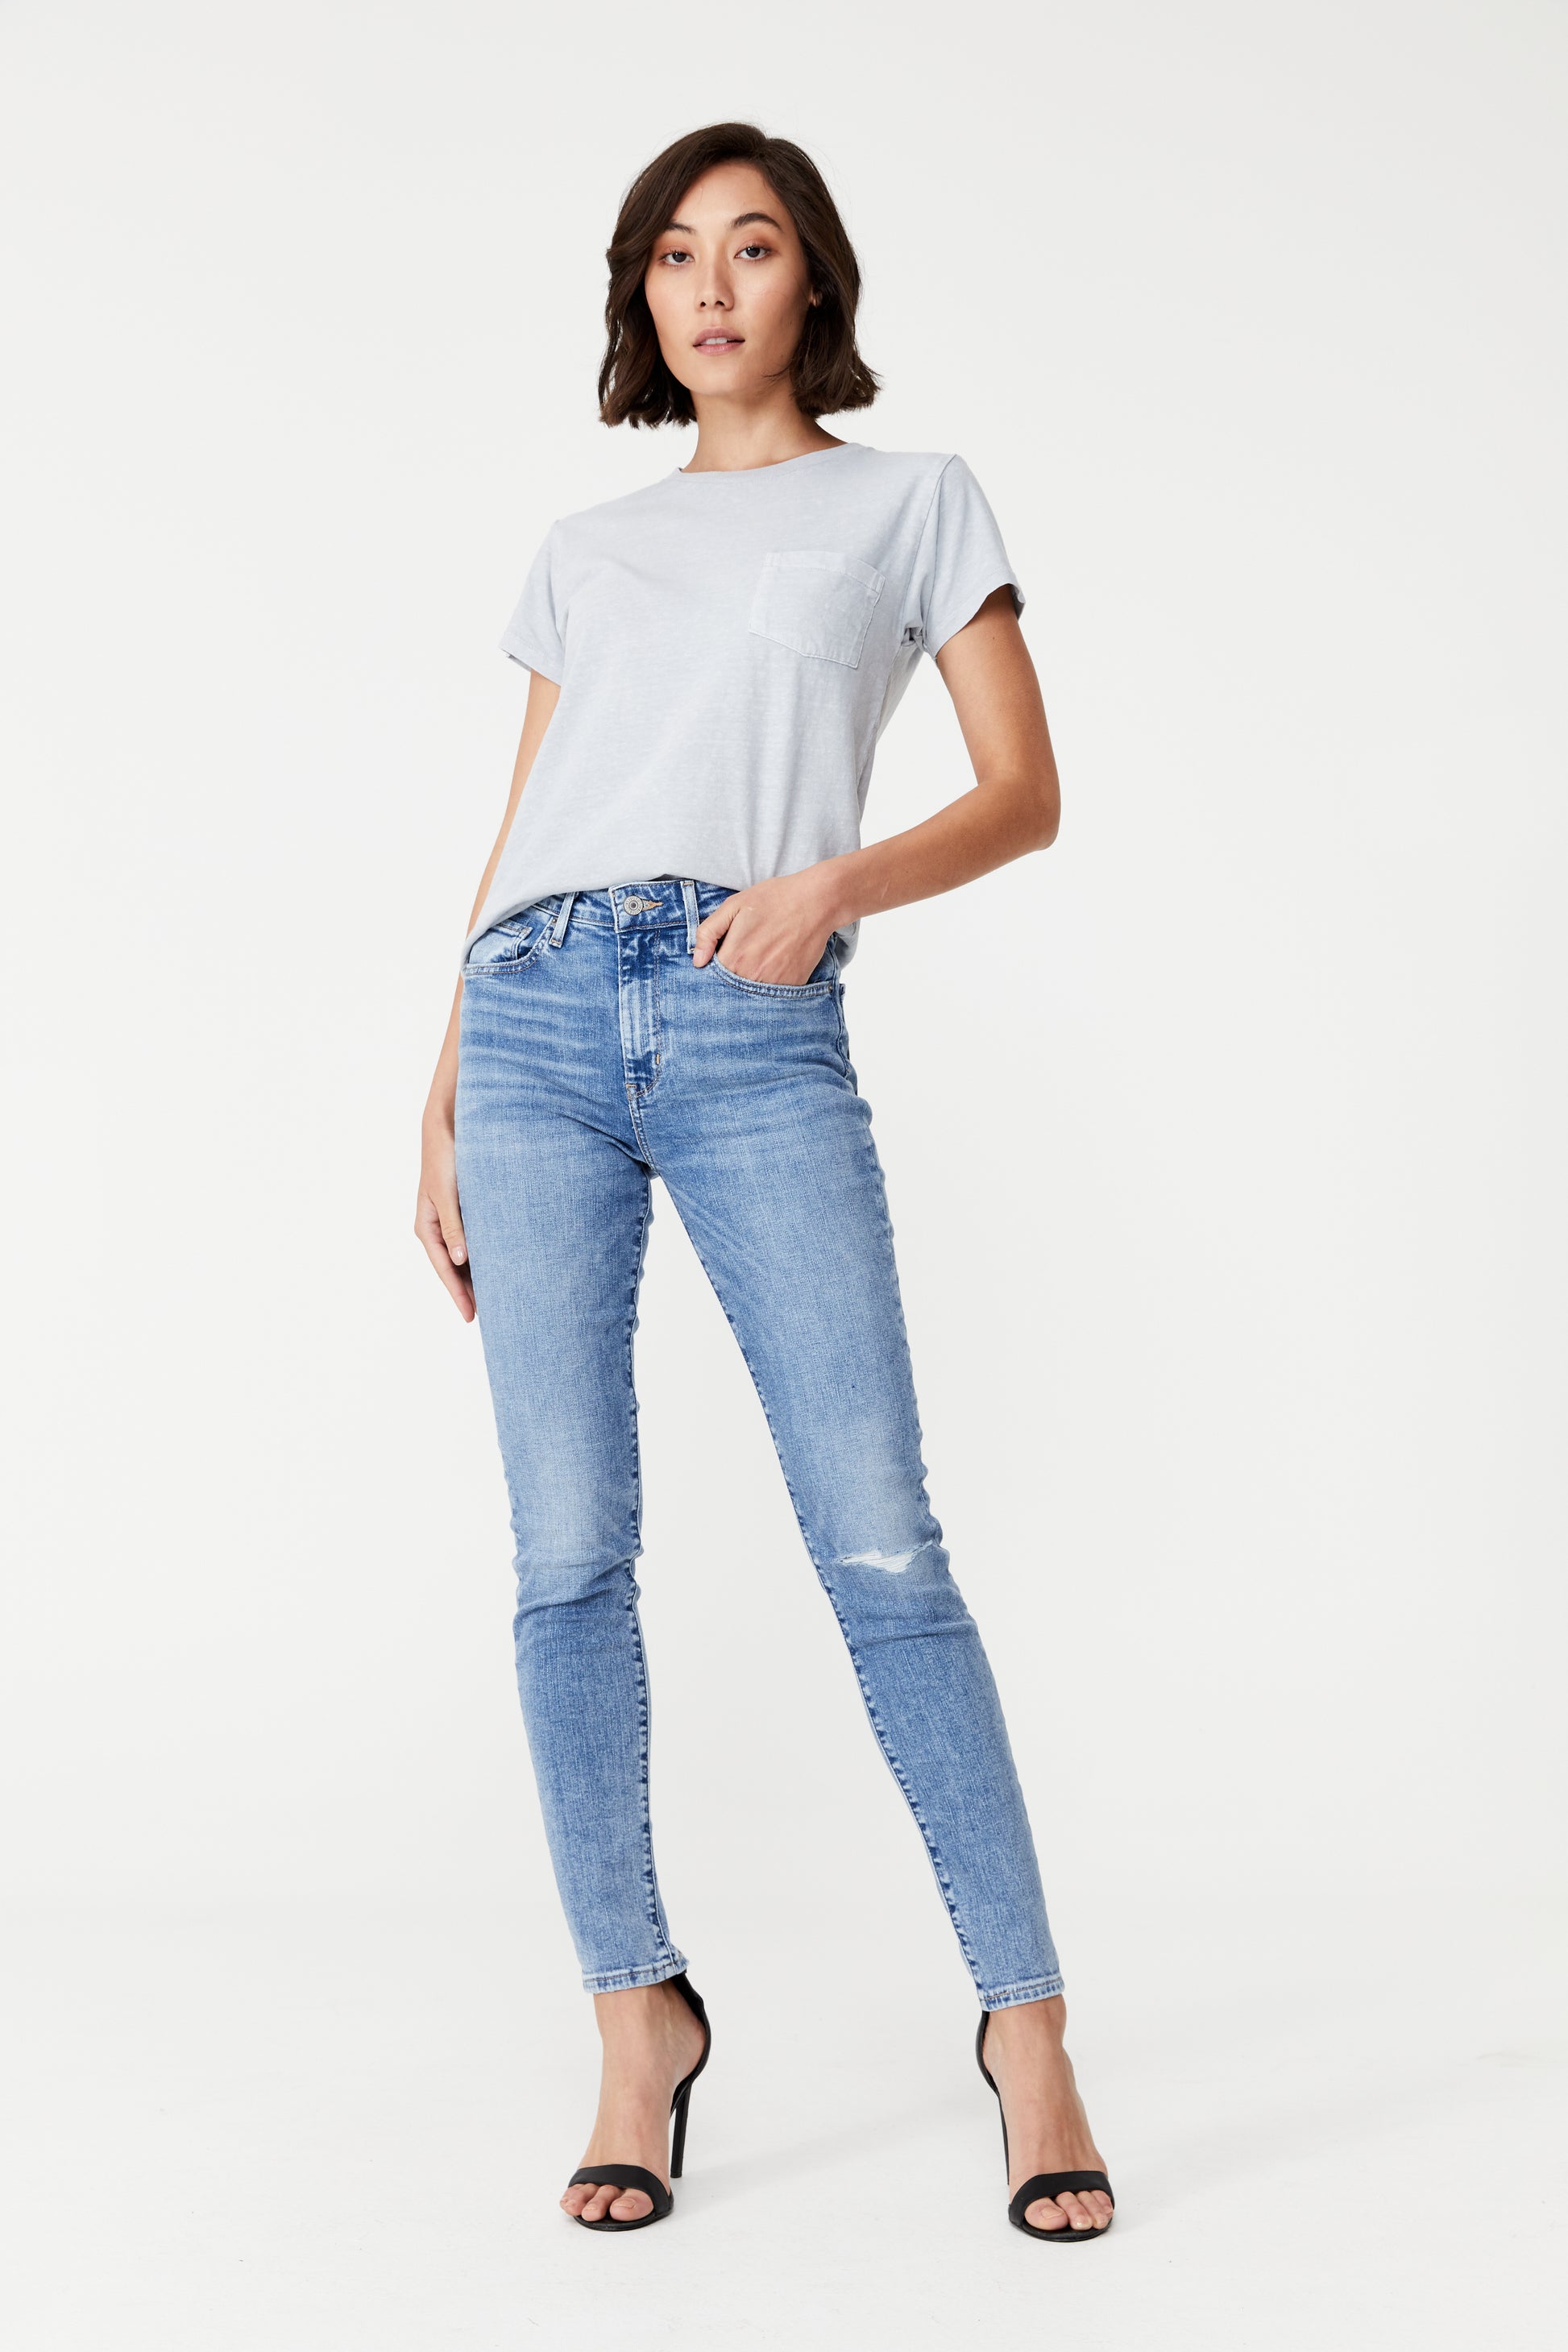 Levis 721 High Rise Skinny Jeans in Good Morning – Rawspice Boutique